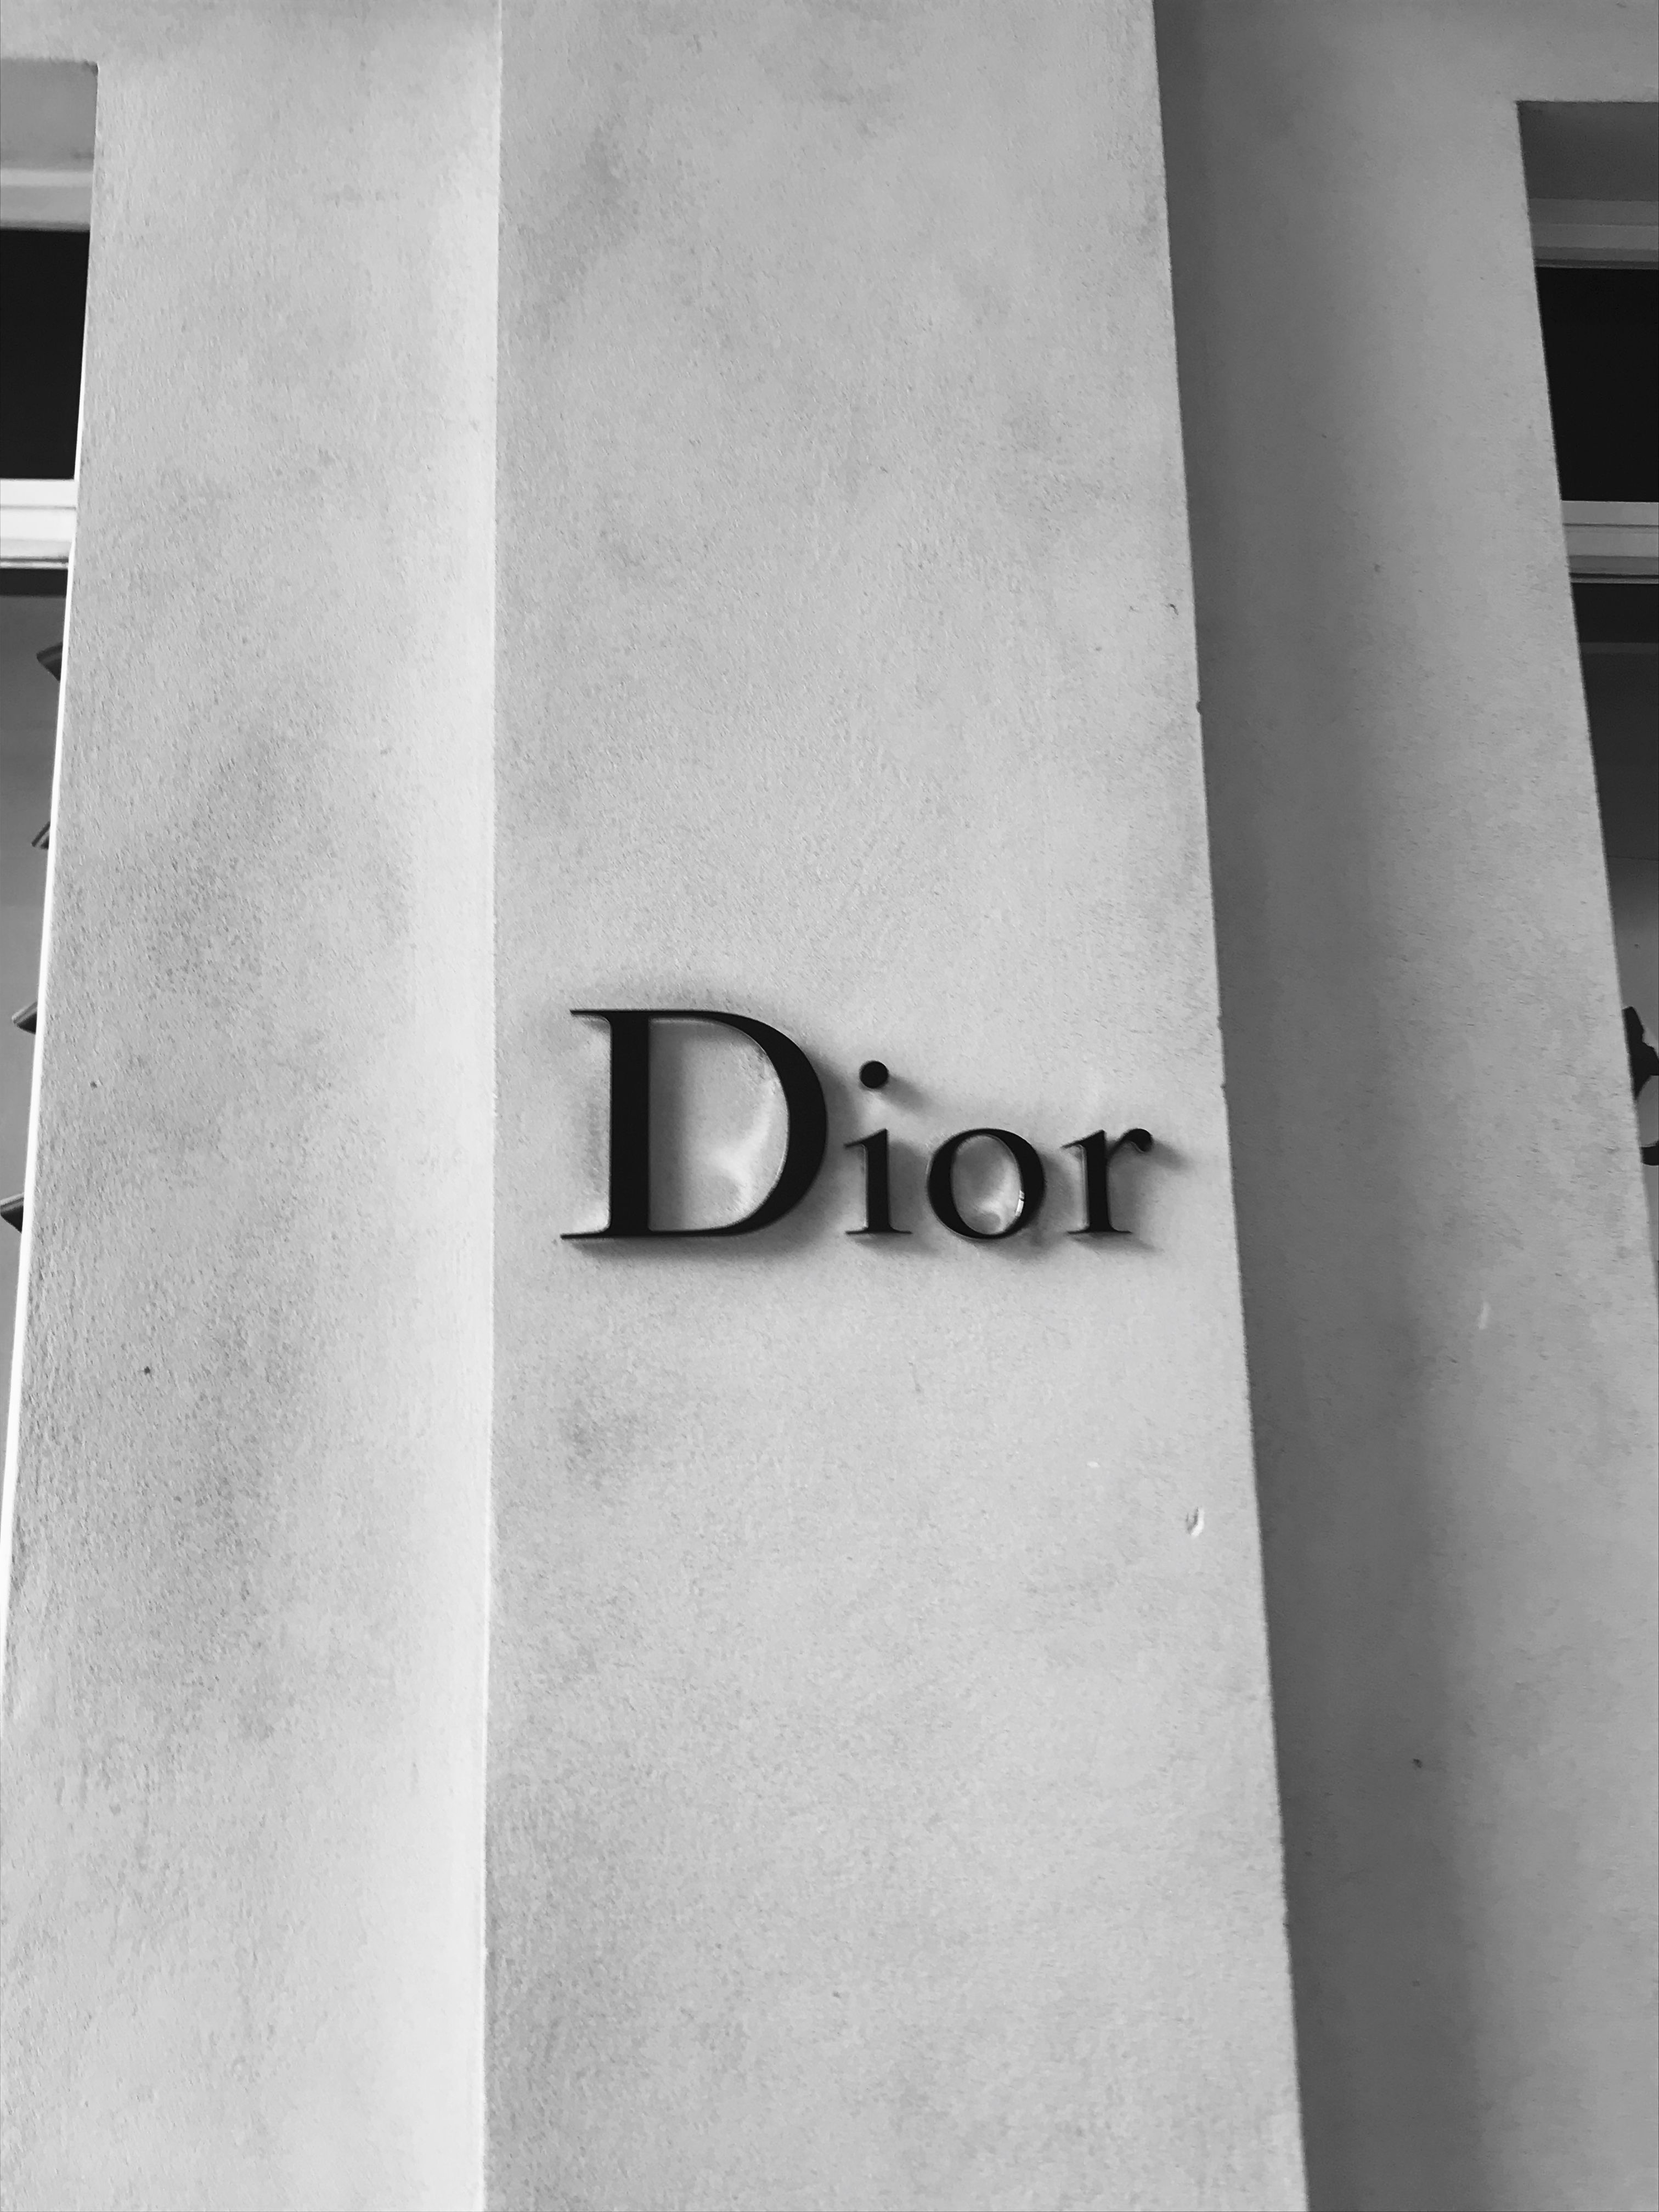 A black and white photo of a Dior sign on a pillar - Dior